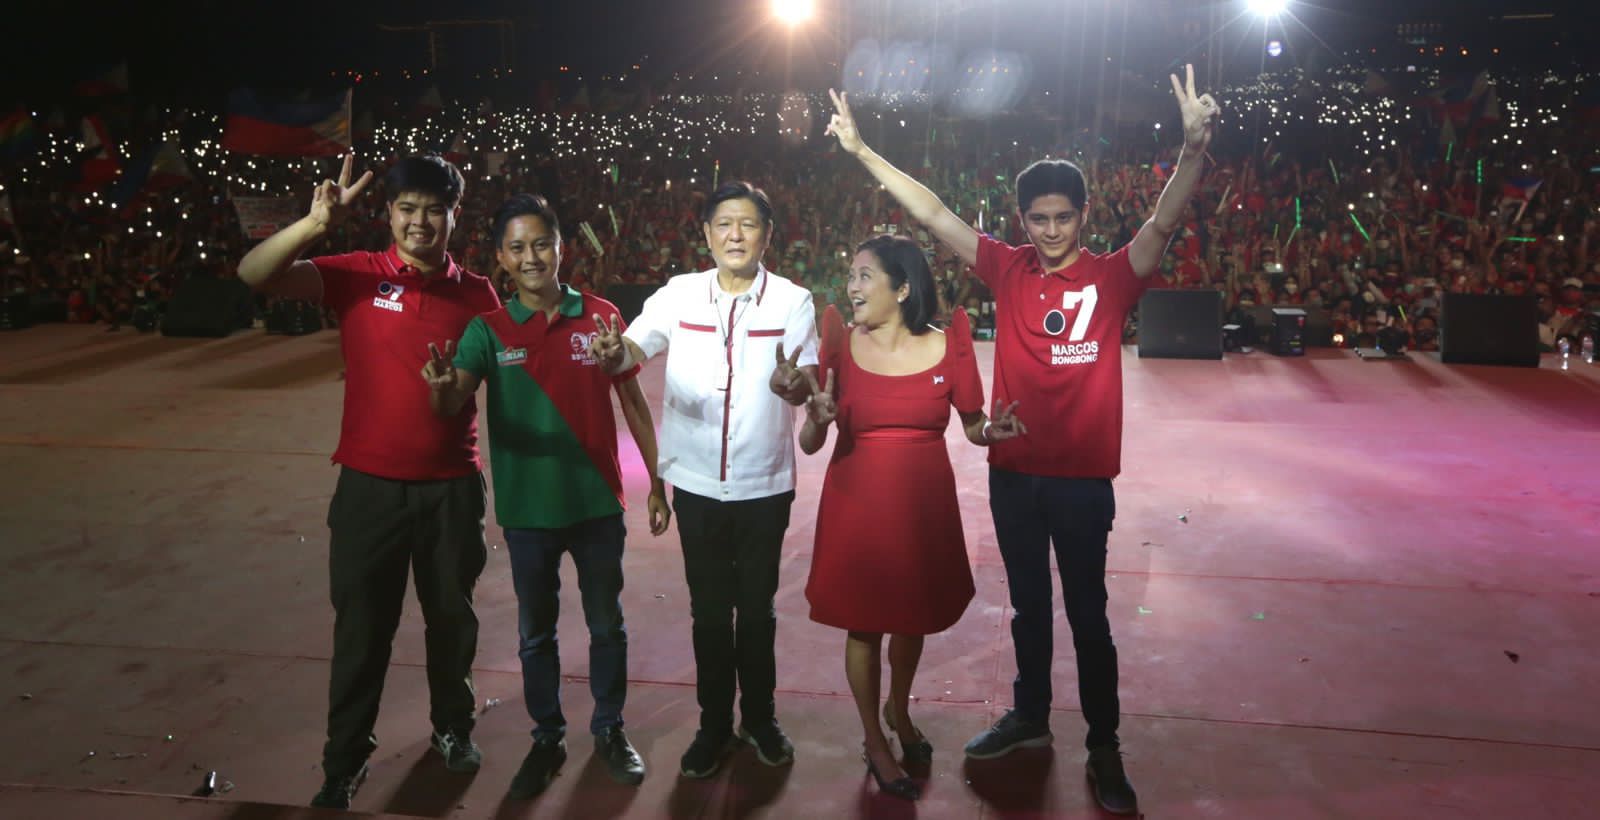 UniTeam miting de avance turns into a ‘victory rally’